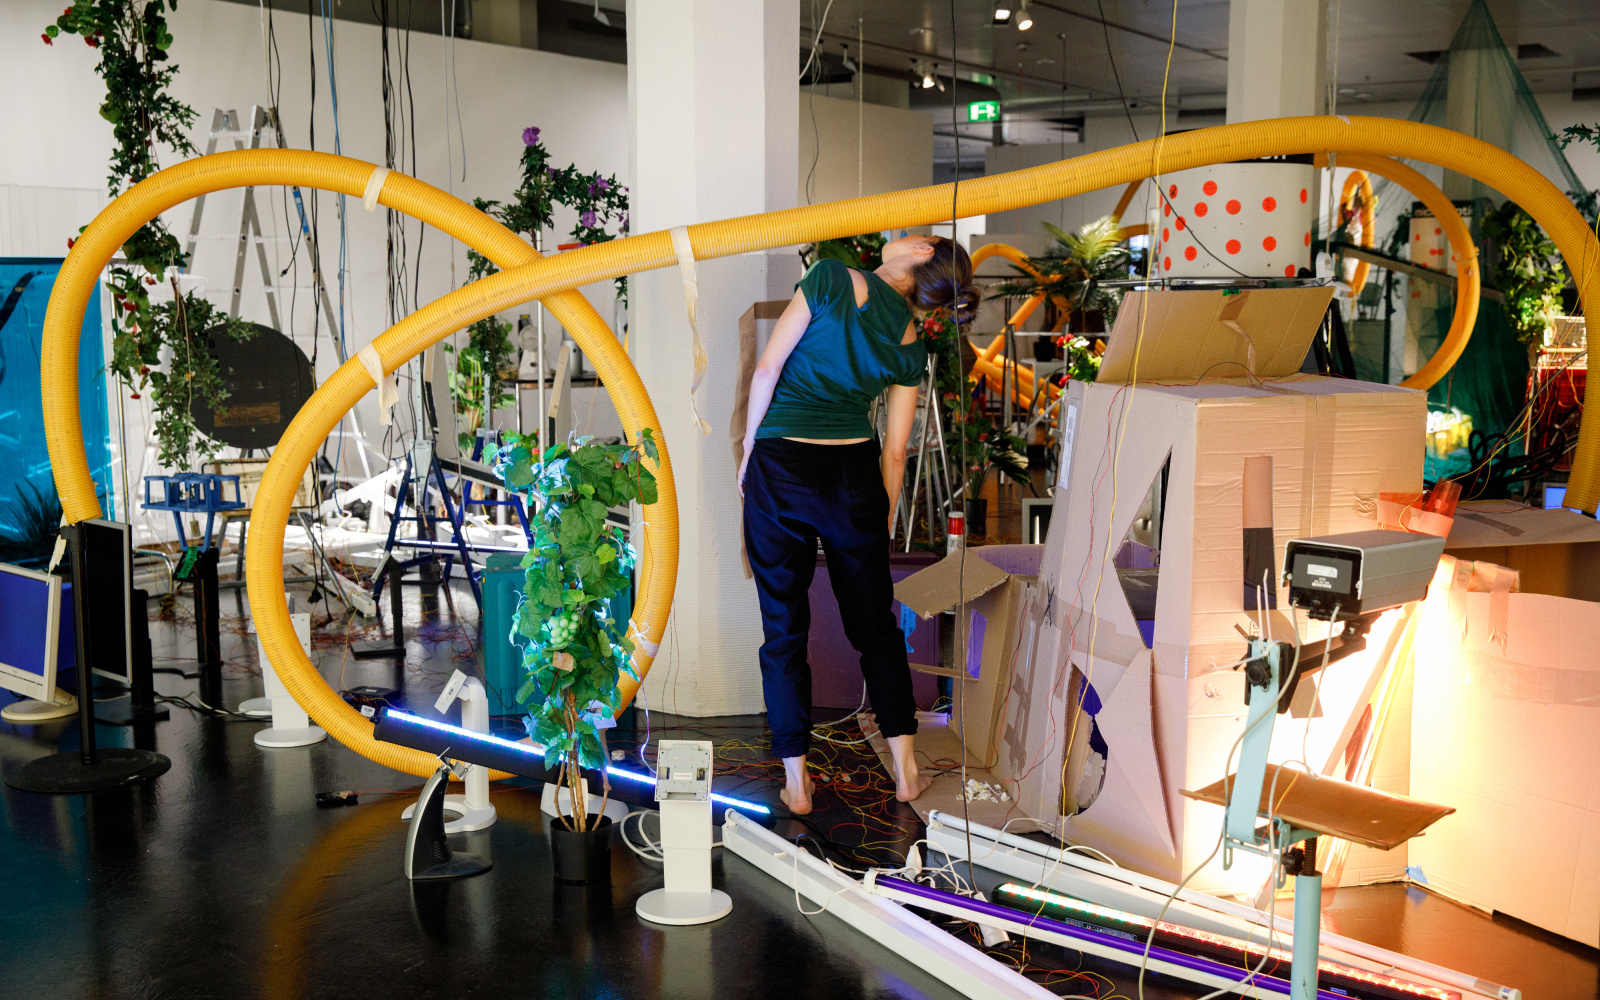 The photo shows an insight into the performance of the opening of »Edge of Now« in the midst of an artinalllation of plants, cardboard and plastic pipes.